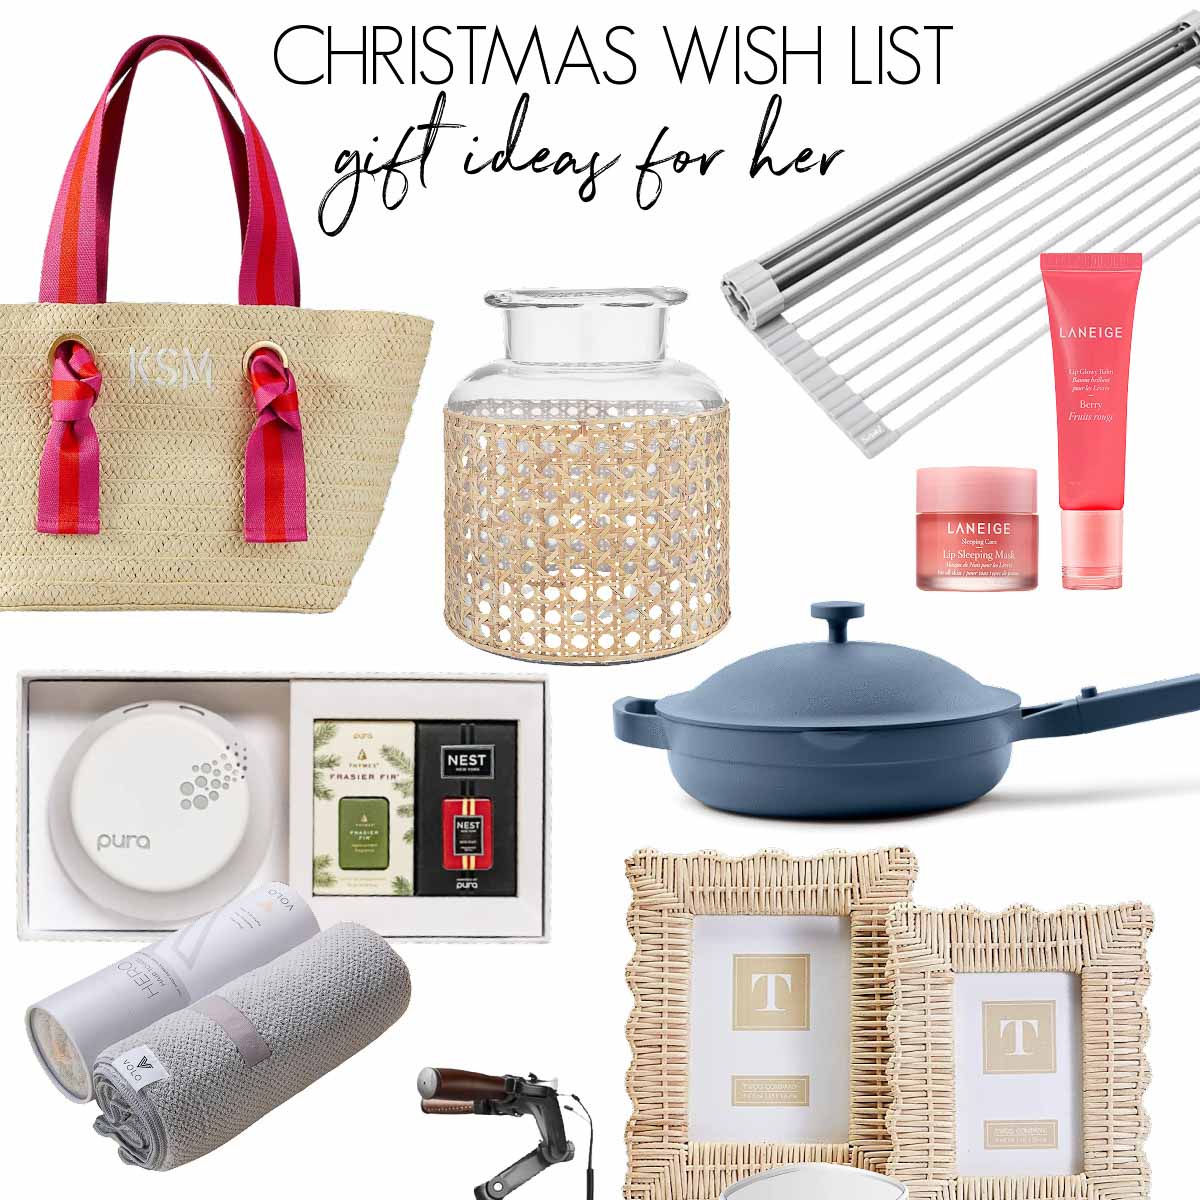 Christmas Wish List Ideas: My Family's Favorite Gifts! - Driven by